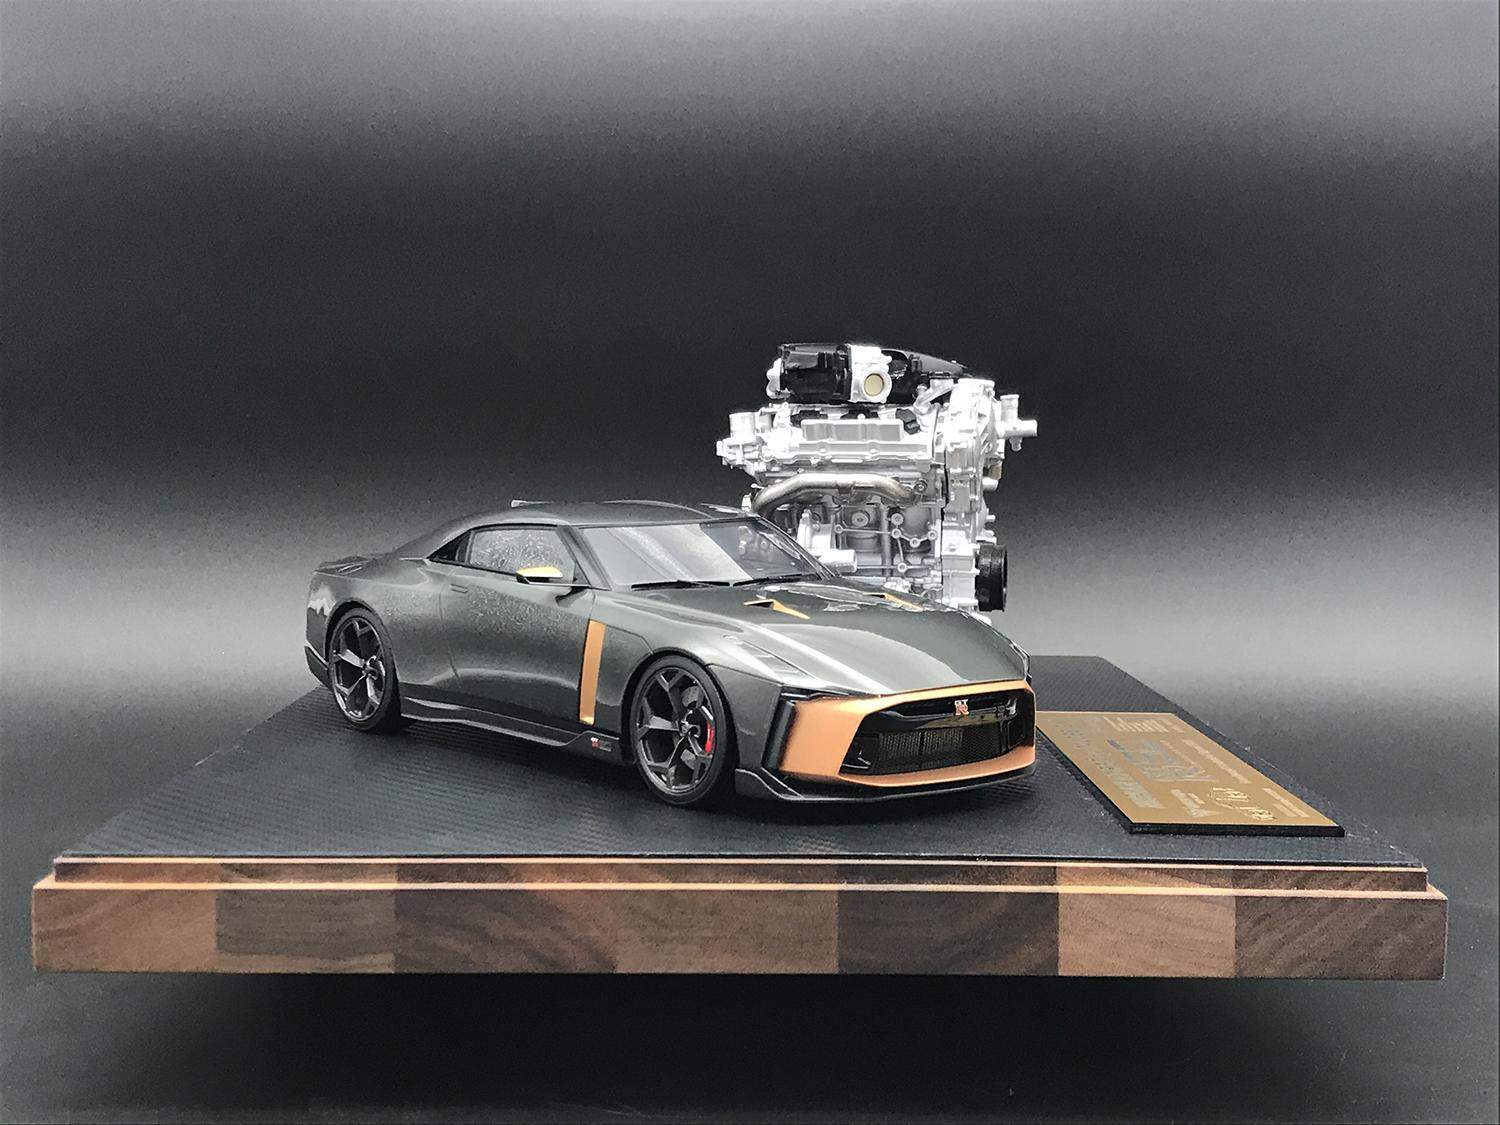 「～Master‛s Series～ NISSAN GT-R50 by Italdesign 2018 Goodwood仕様」全景